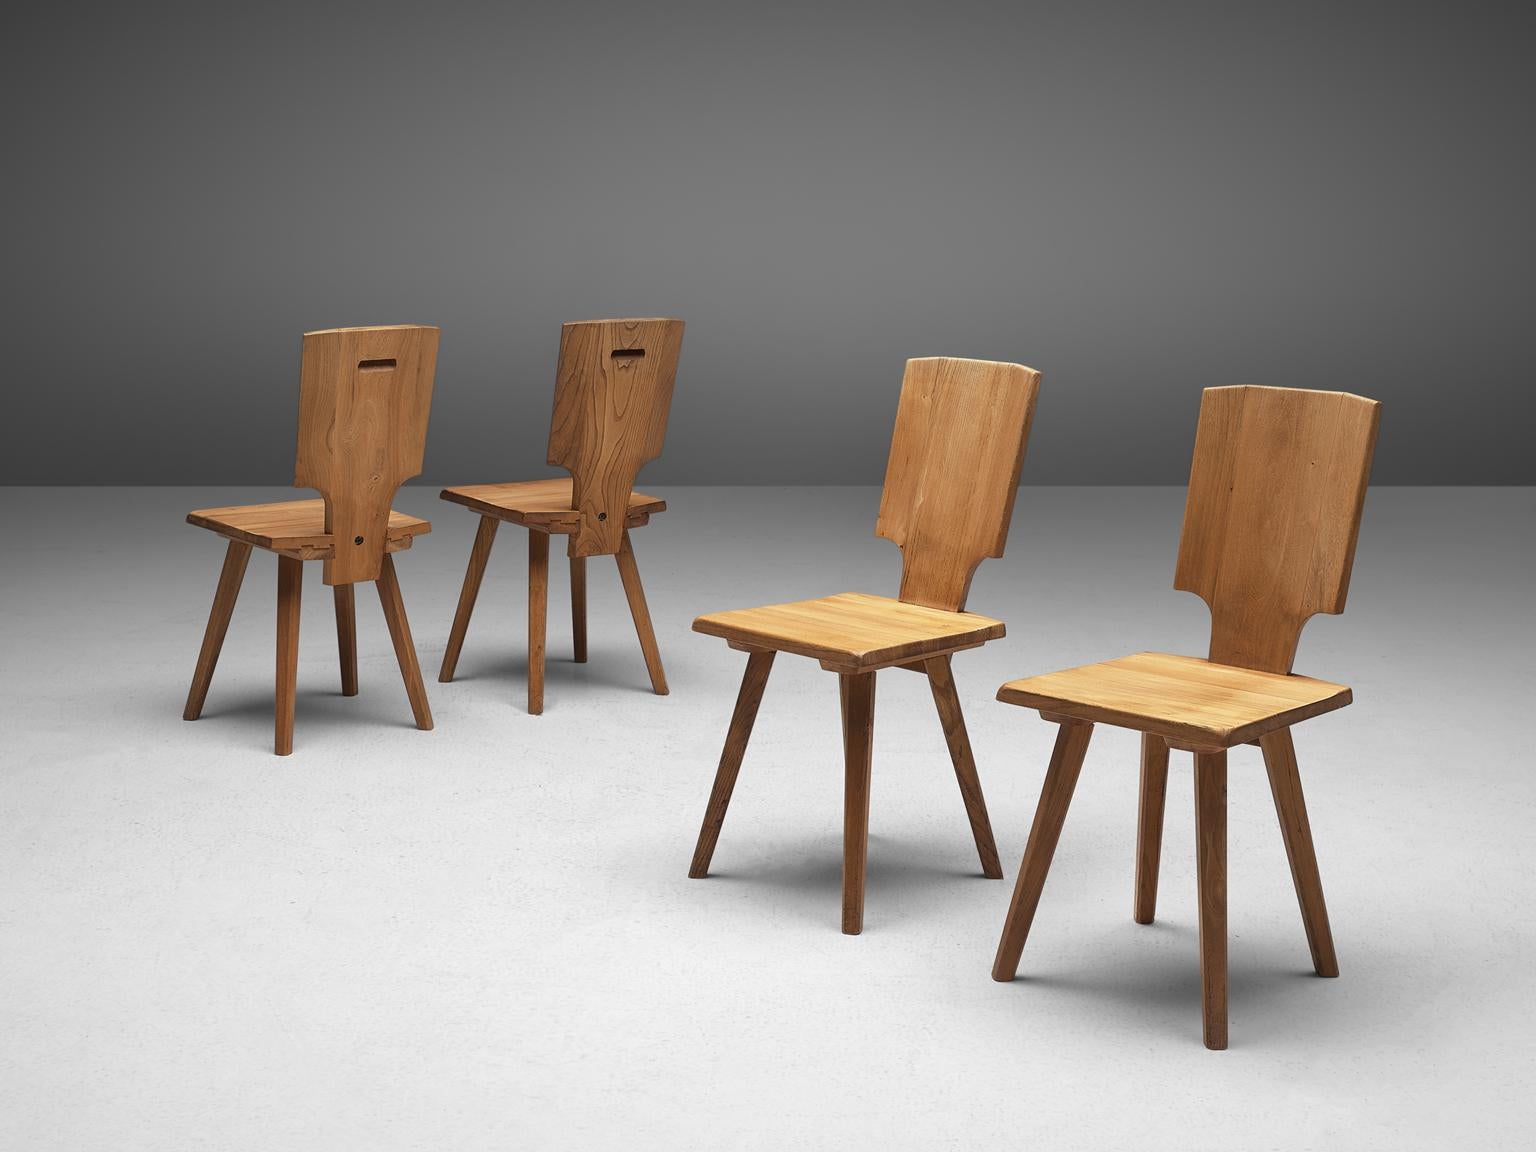 Pierre Chapo, set of 4 S28 dining chairs, elmwood, France, design 1972, manufacture 1975

During his travels to Alsace, Chapo discovered the Alsatian architecture and got inspired to modernize the 